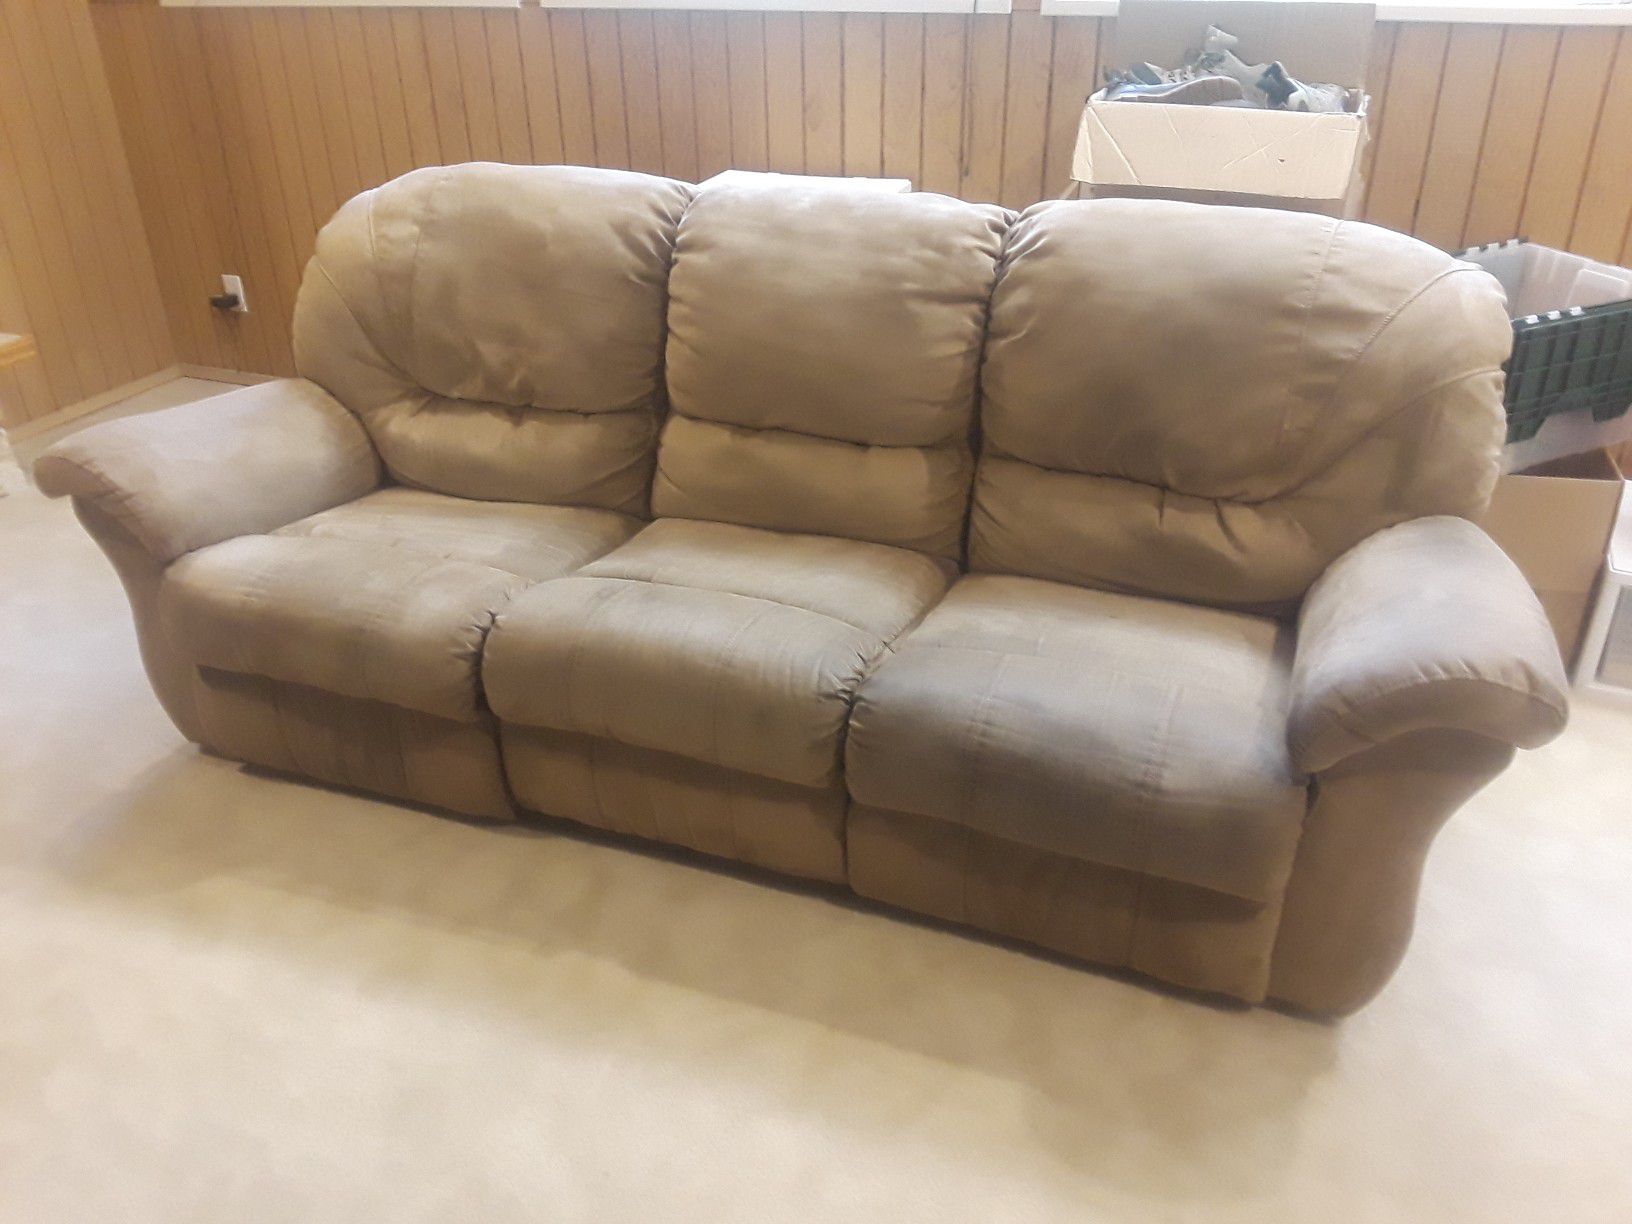 Dual reclining couch with matching recliner